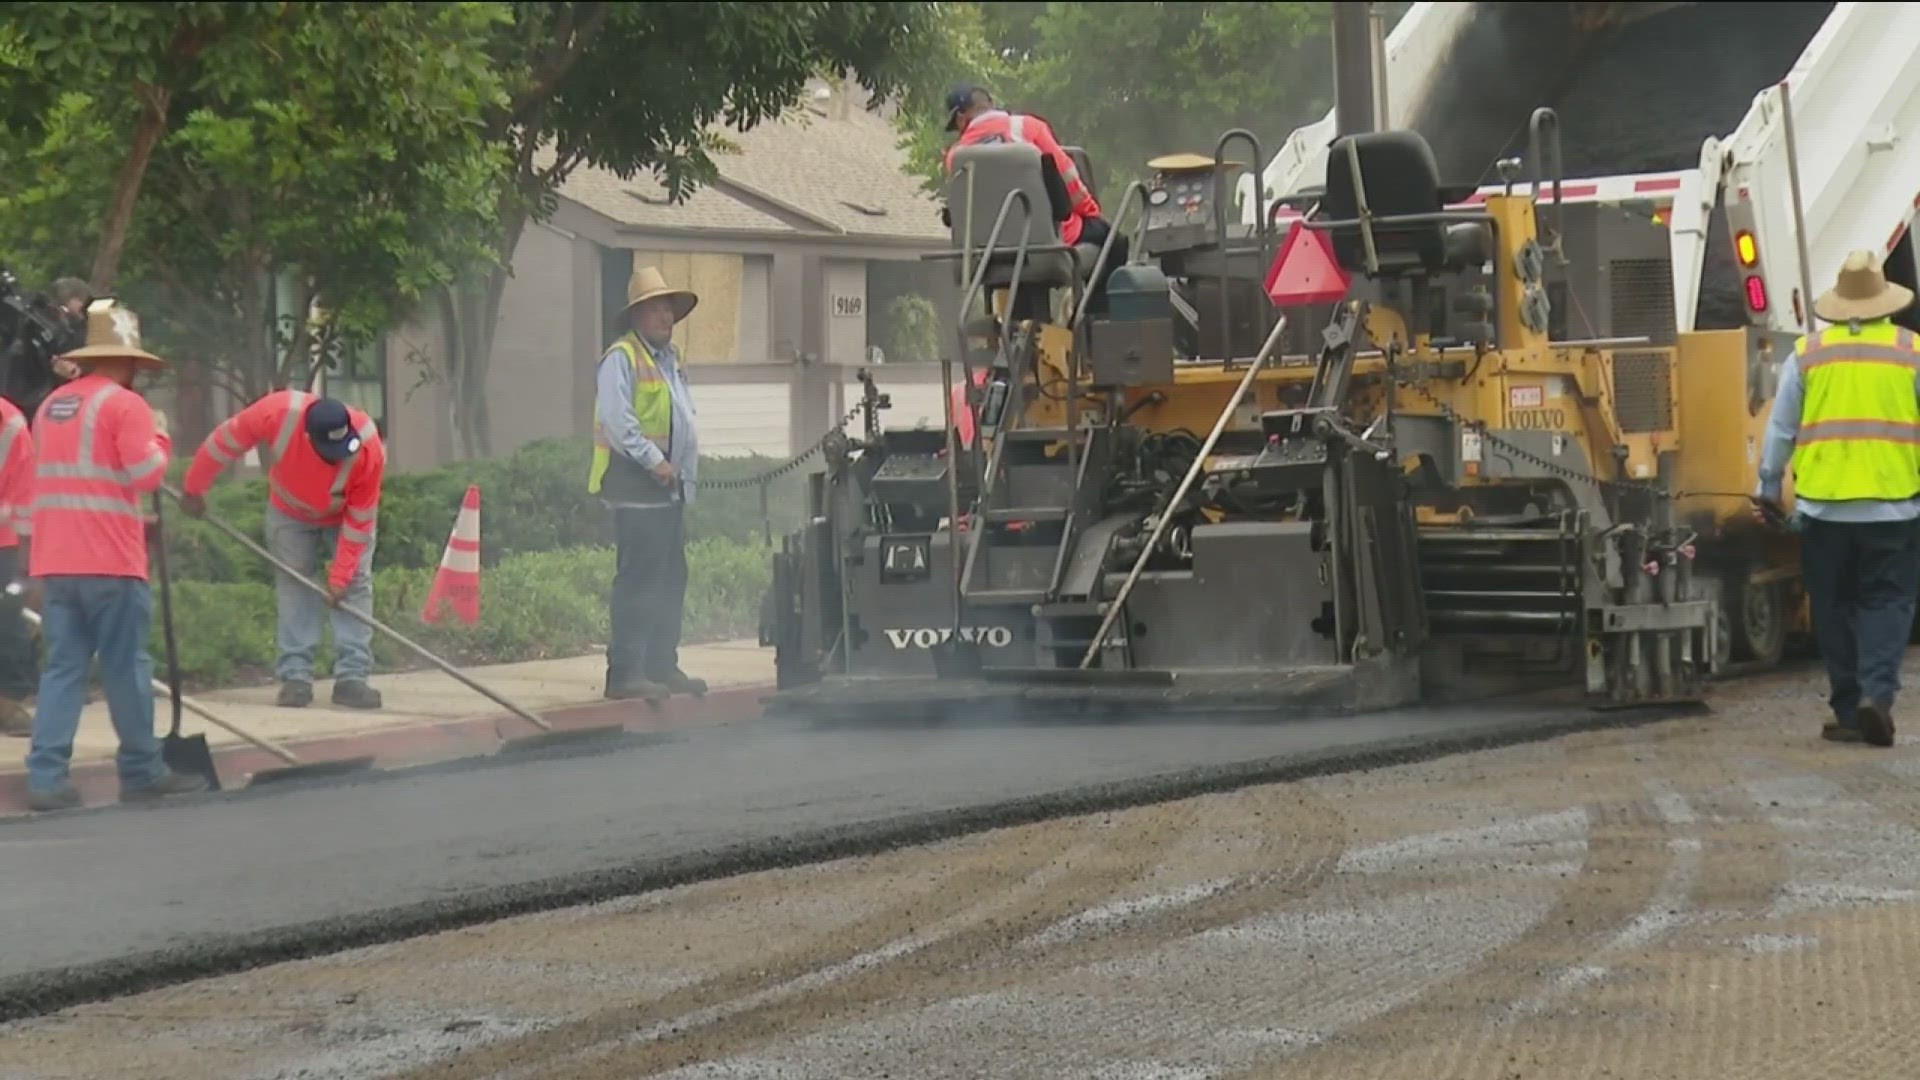 According to the City of San Diego, it's filled more than 400 potholes along Village Glen Drive in the past year.